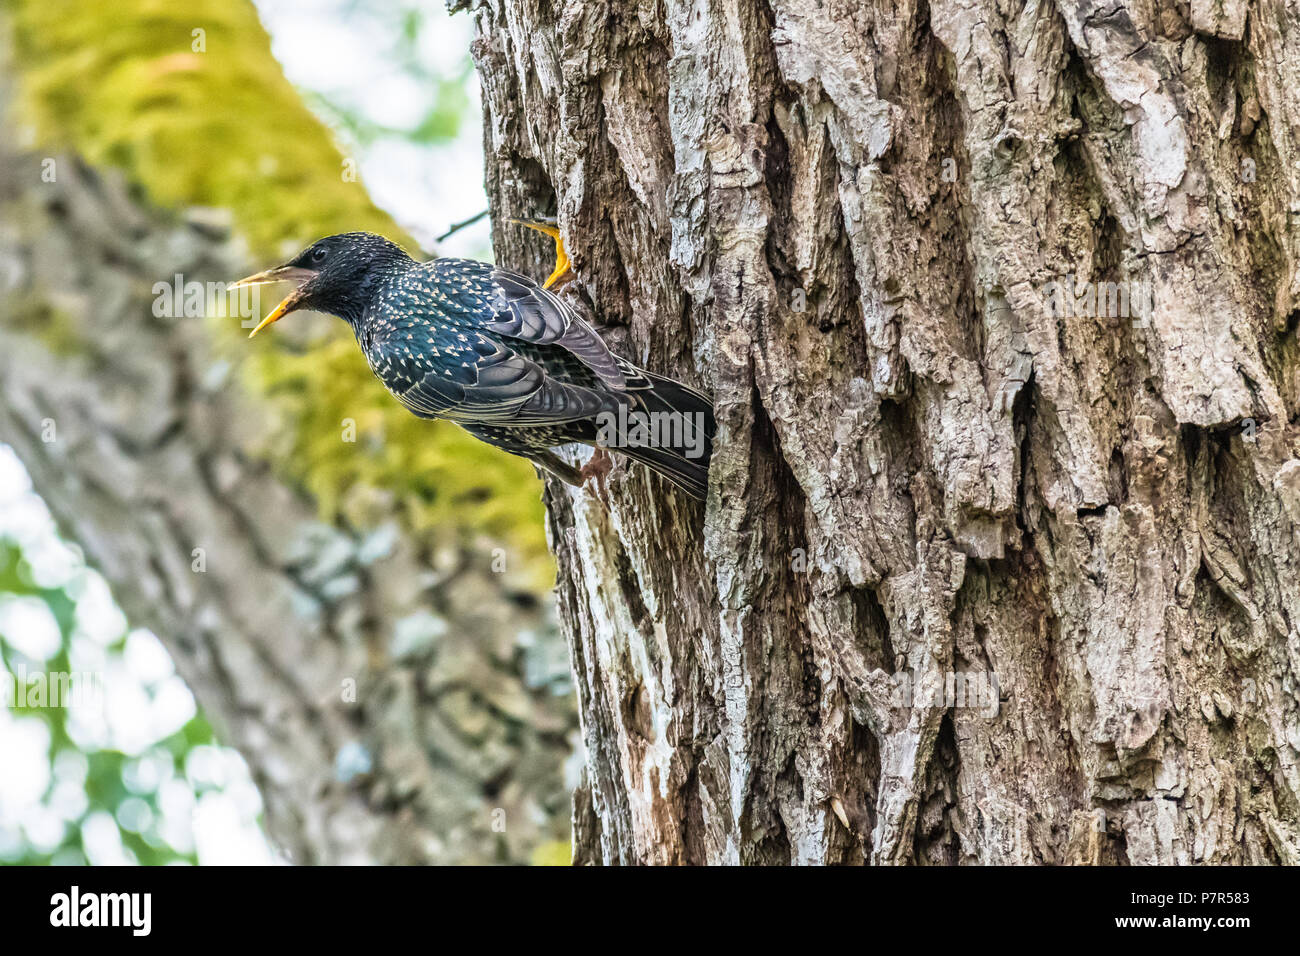 The parent of a common starling feeding a chick in a nest in a tree hole. Also known as Sturnus vulgaris or European starling. Stock Photo